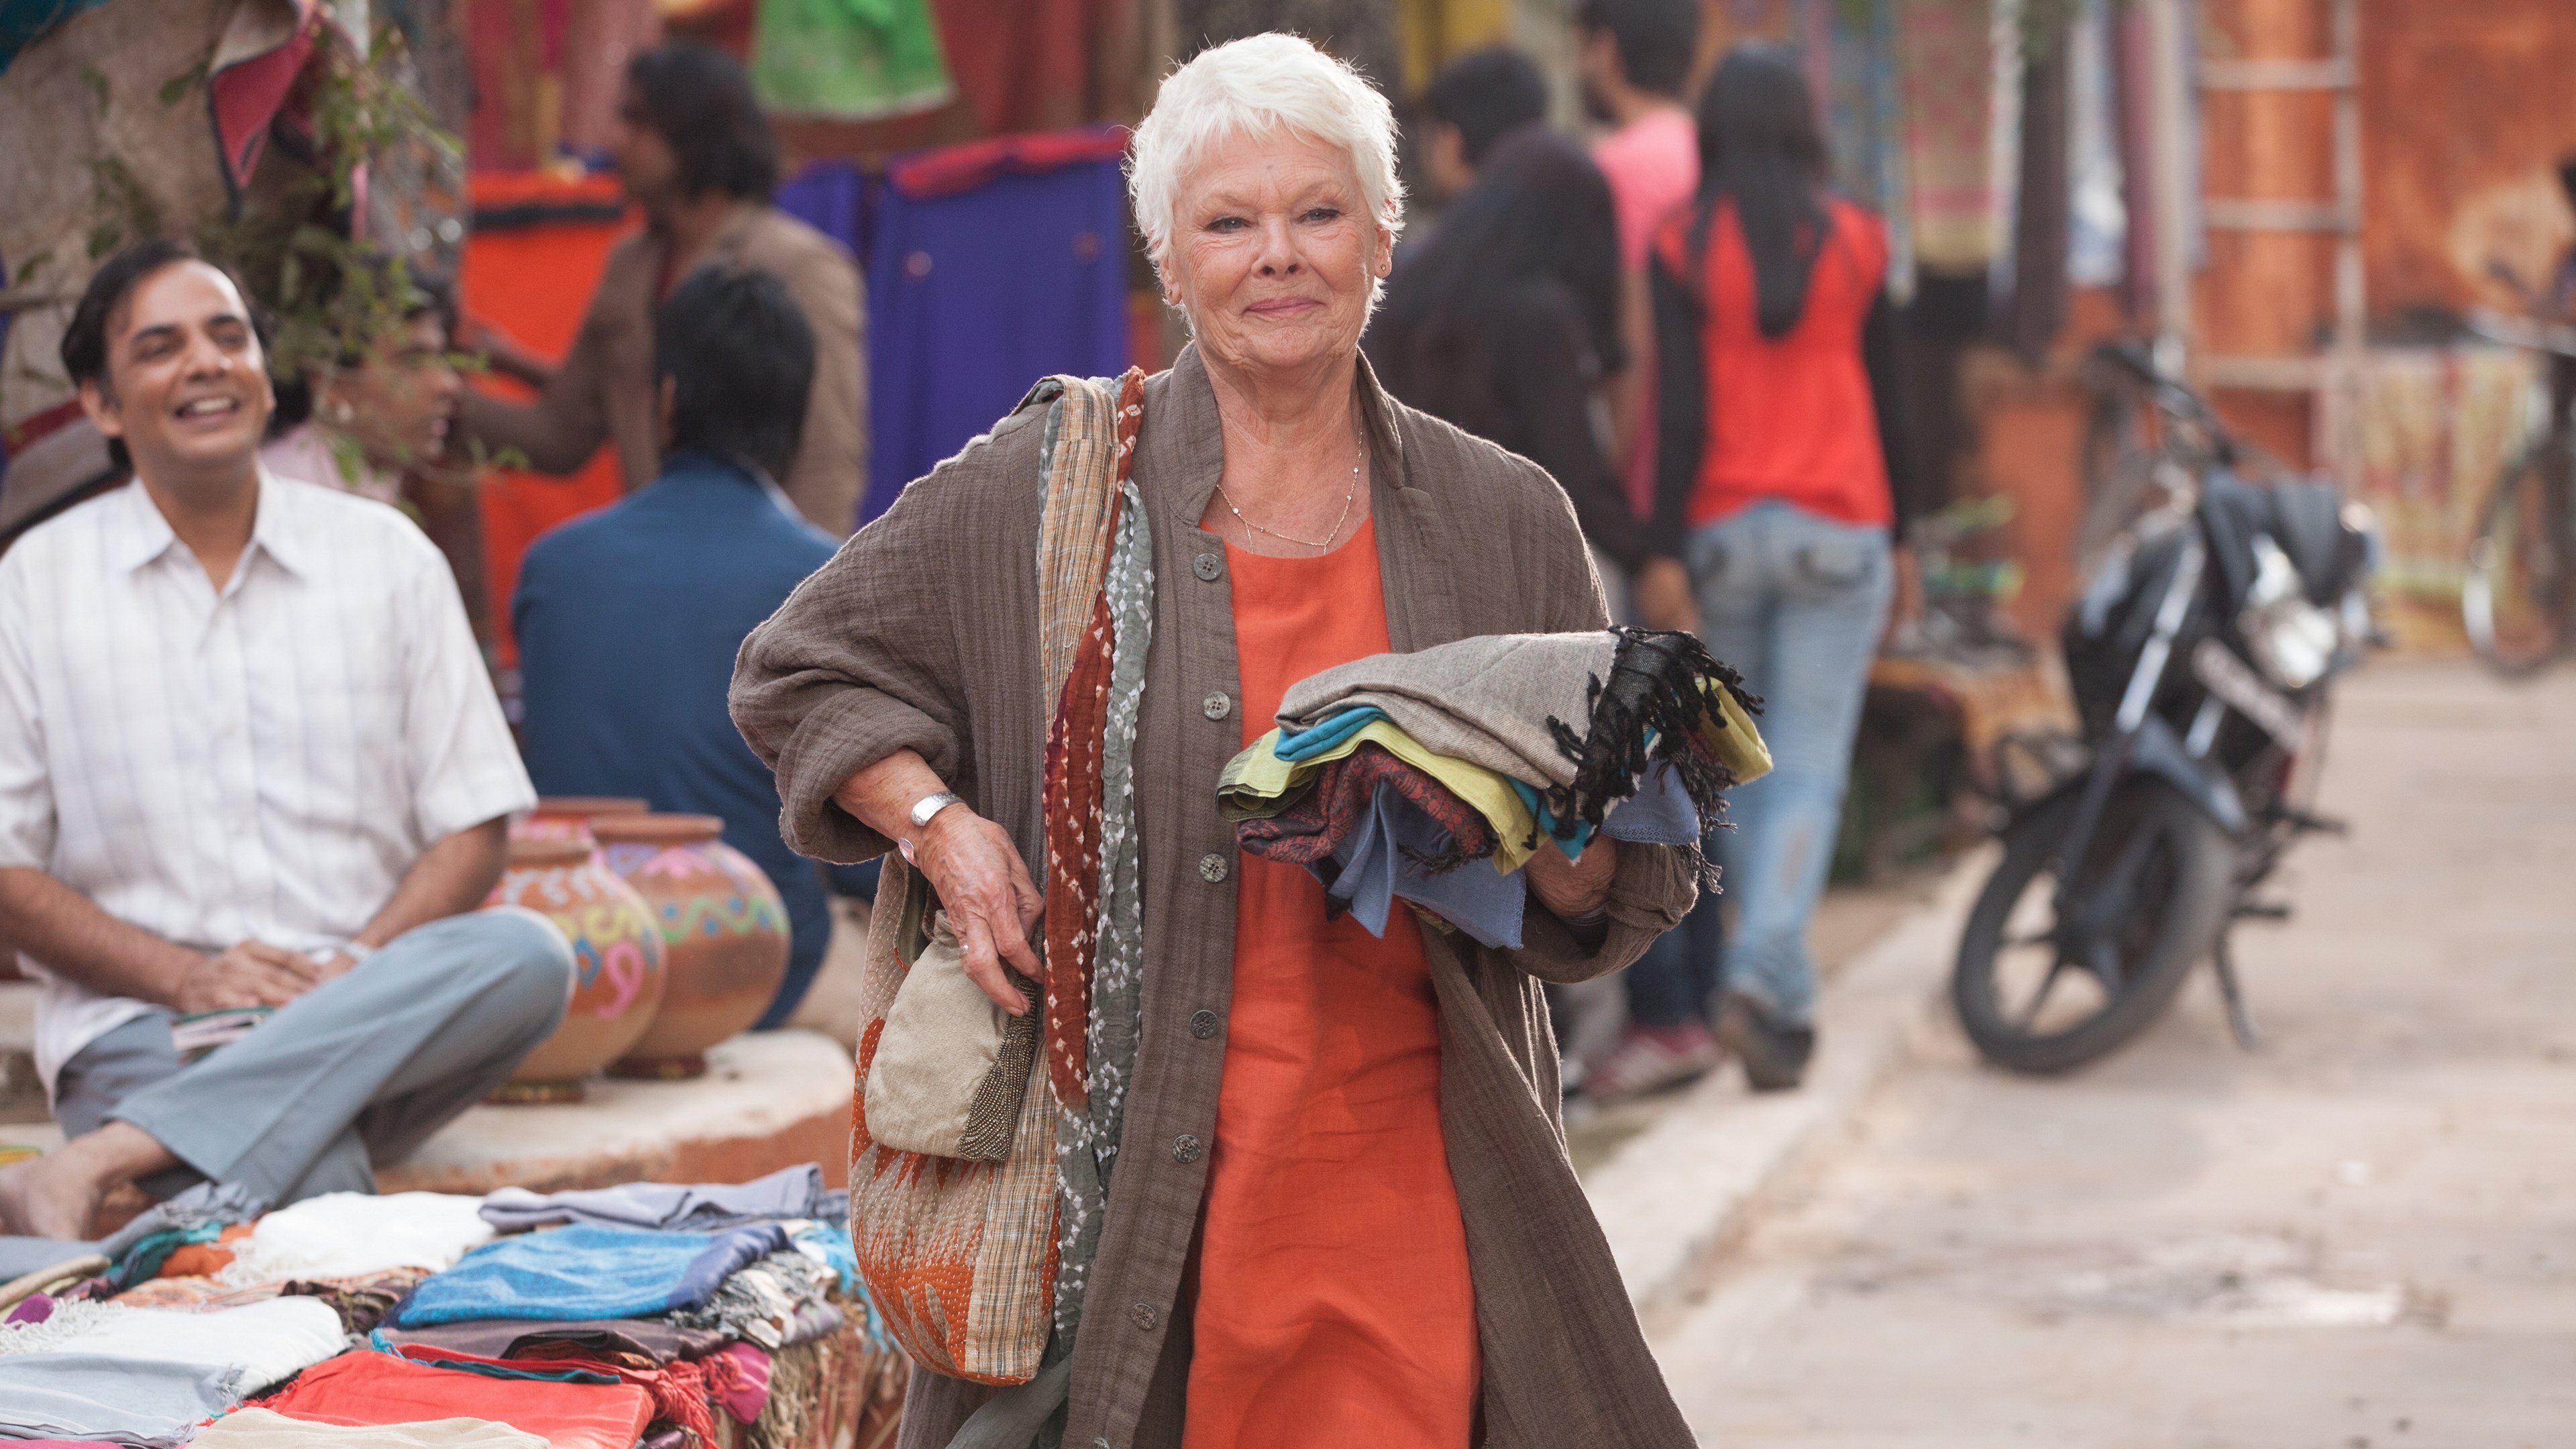 The Second Best Exotic Marigold Hotel 4k Ultra HD Wallpaper